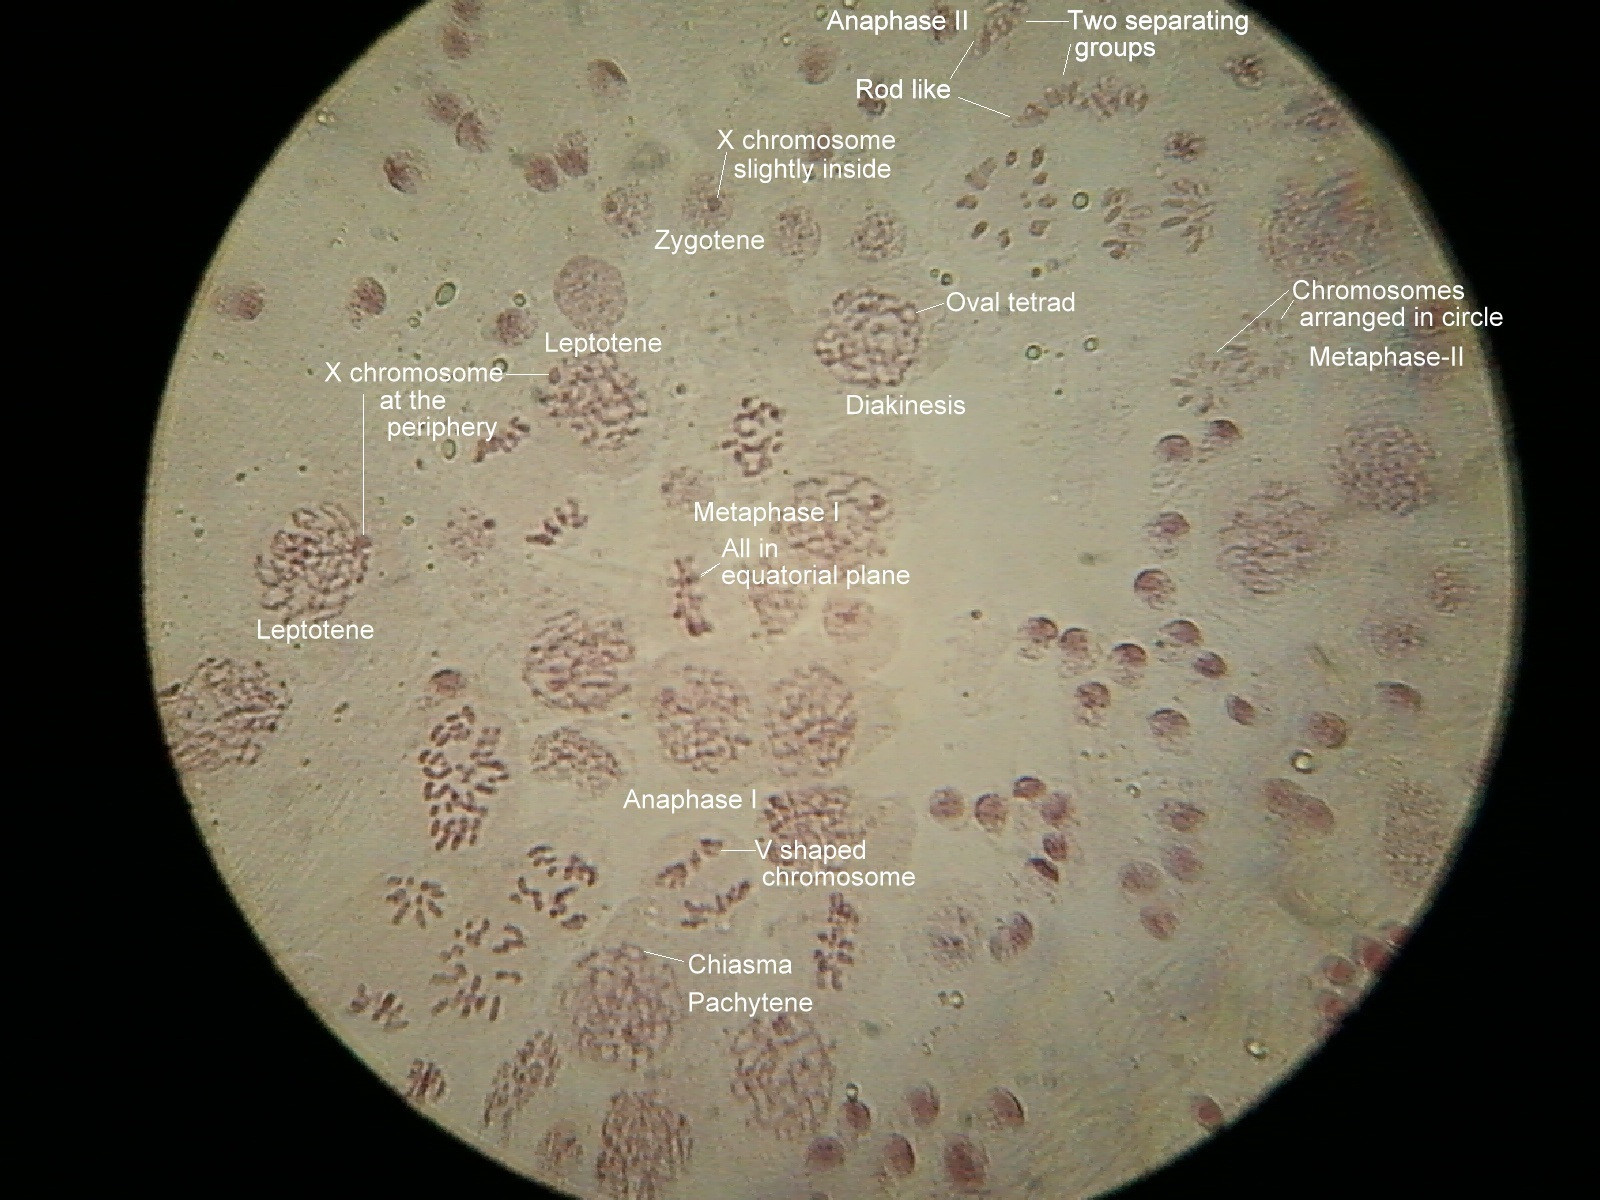 meiosis stages under microscope